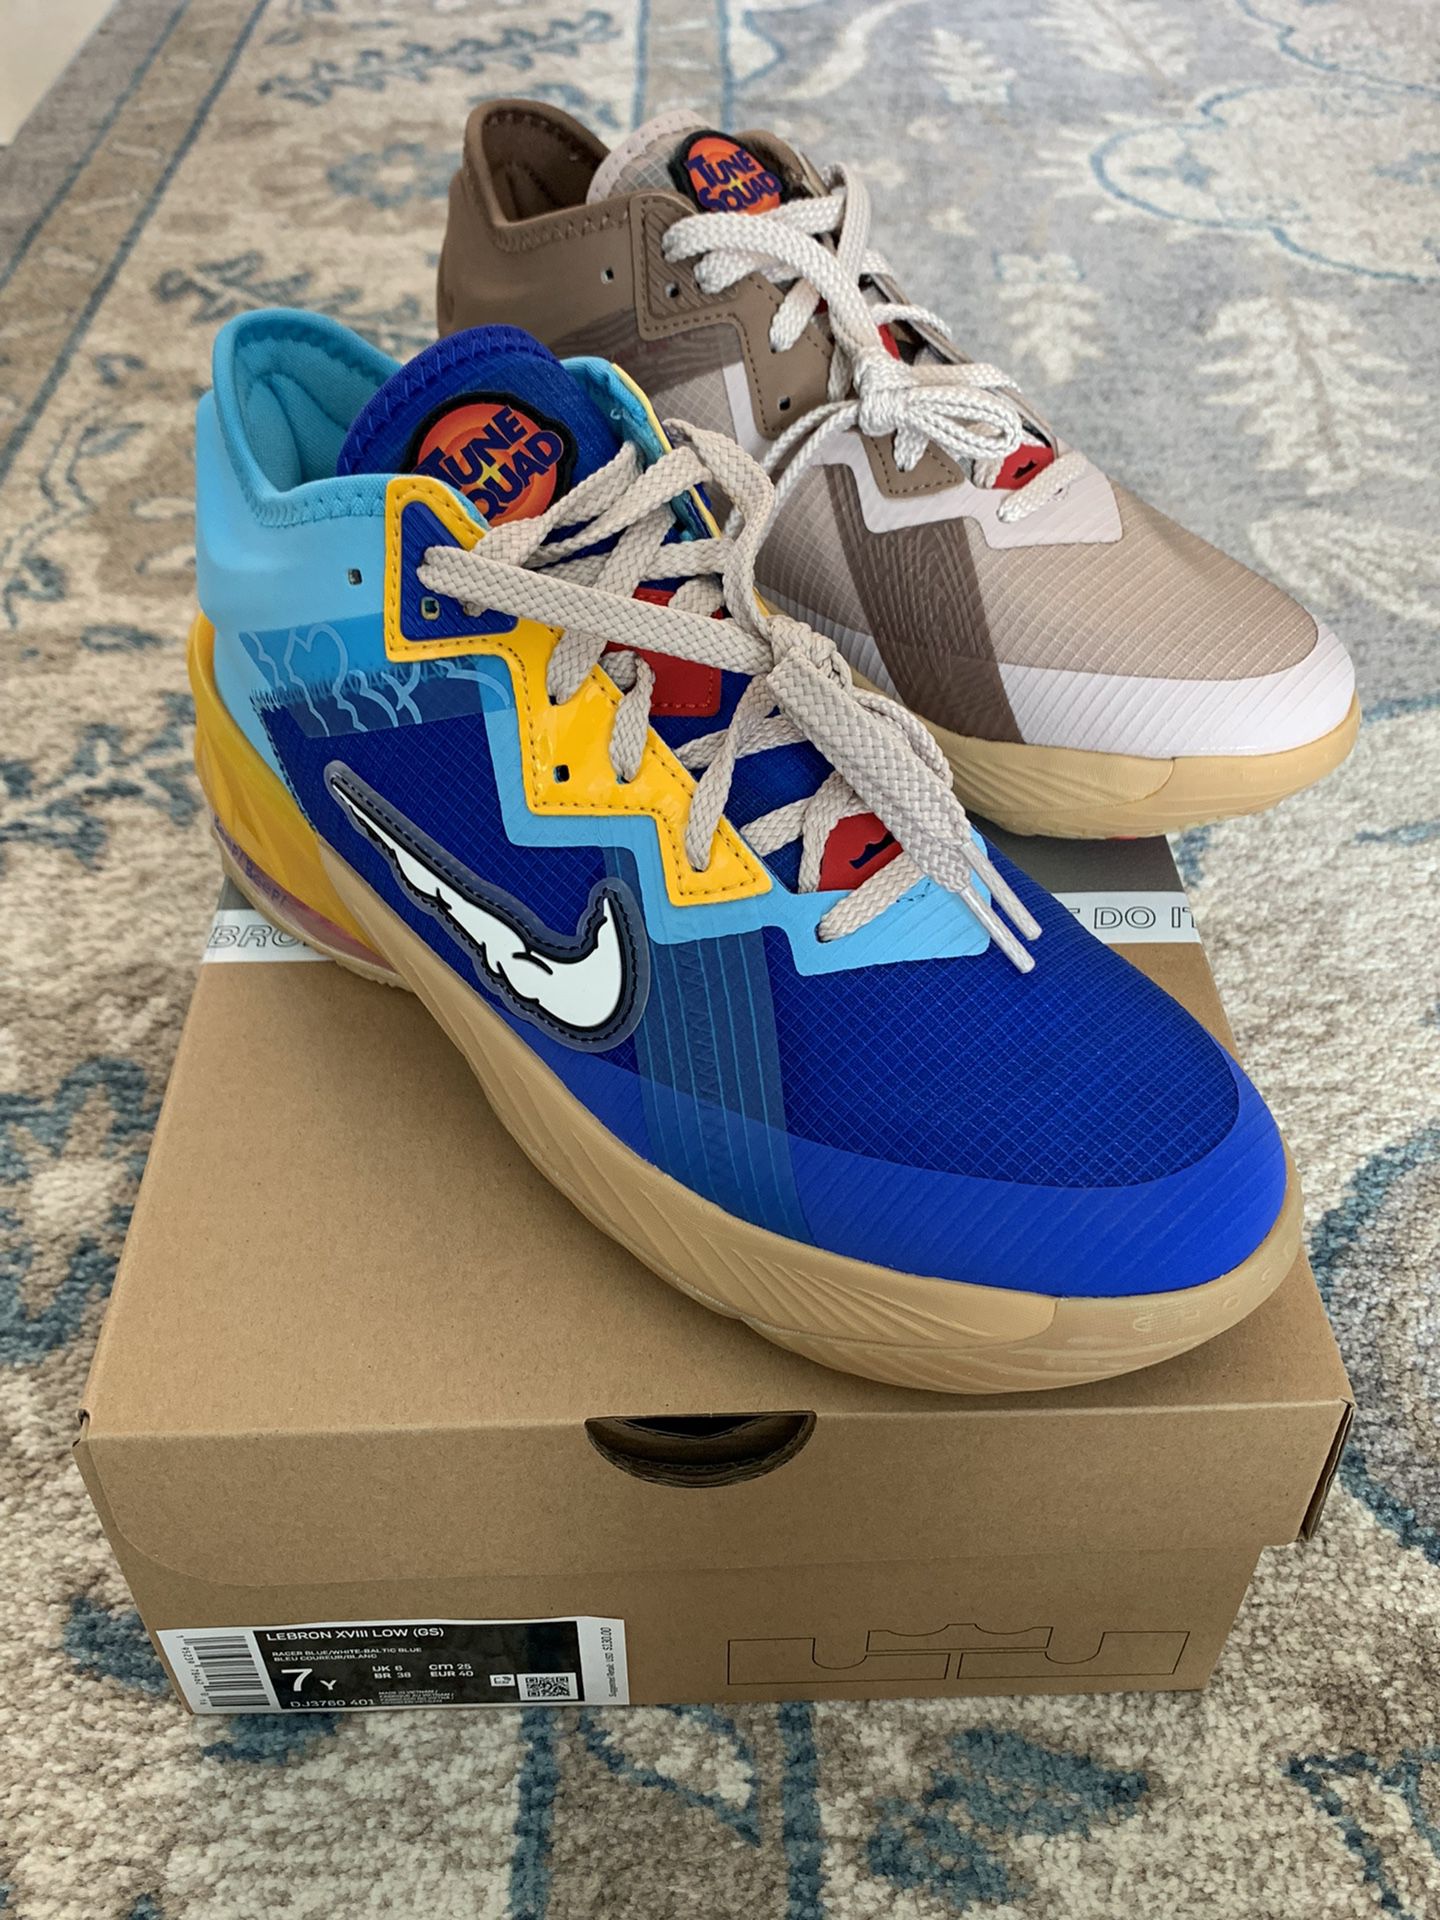 Space Jam Nike Lebron 18 Low for Sale in Miami, FL - OfferUp